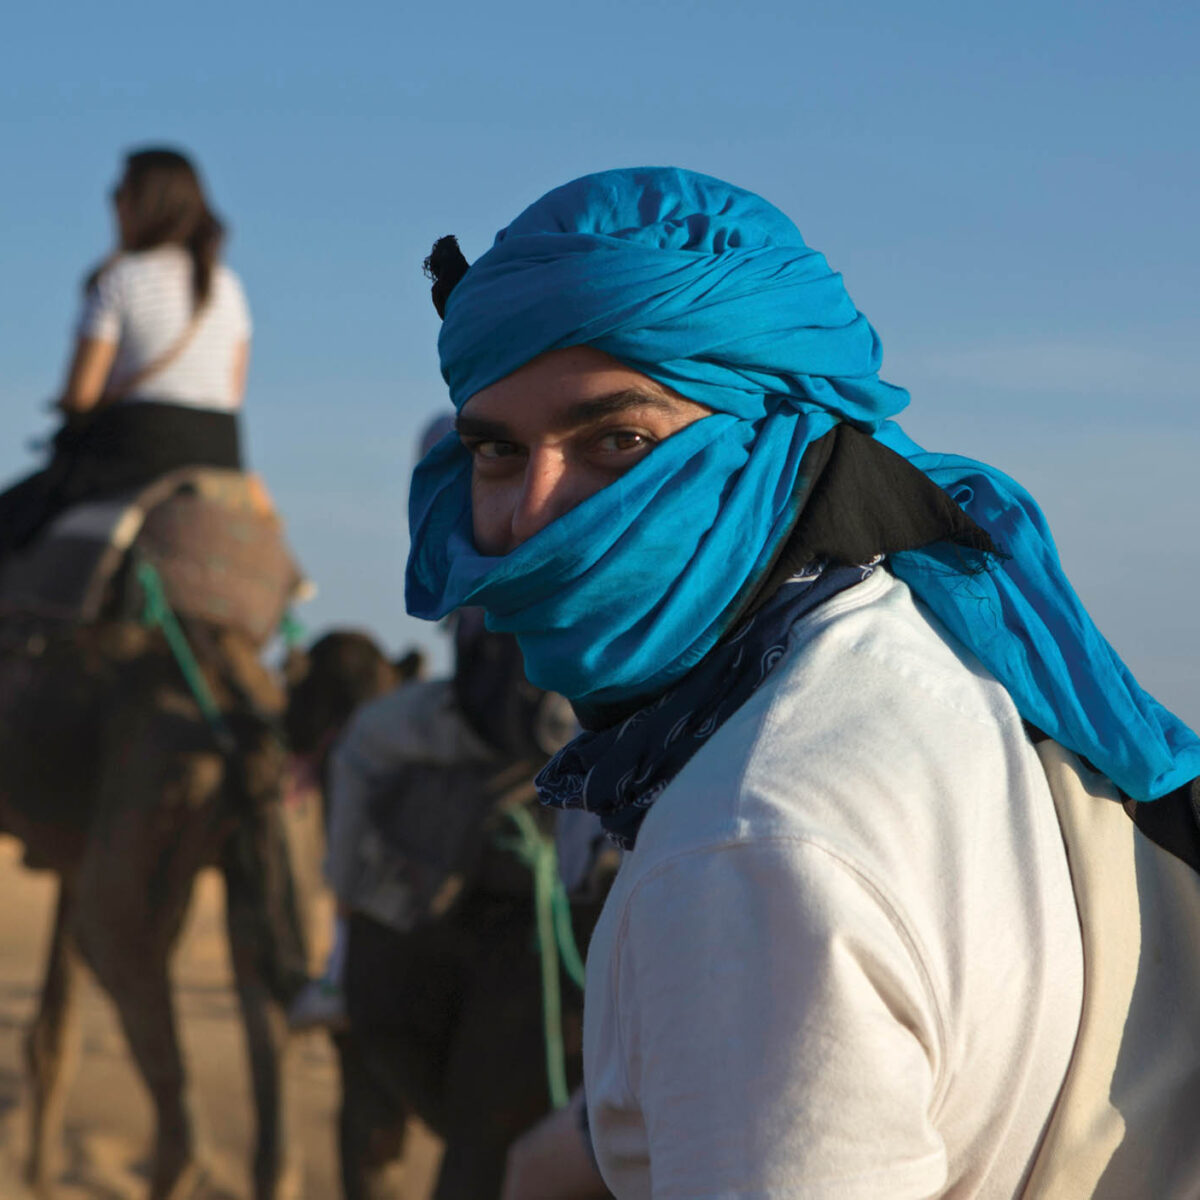 an abroad student in morocco, wearing a head covering while walking with camels in the desert